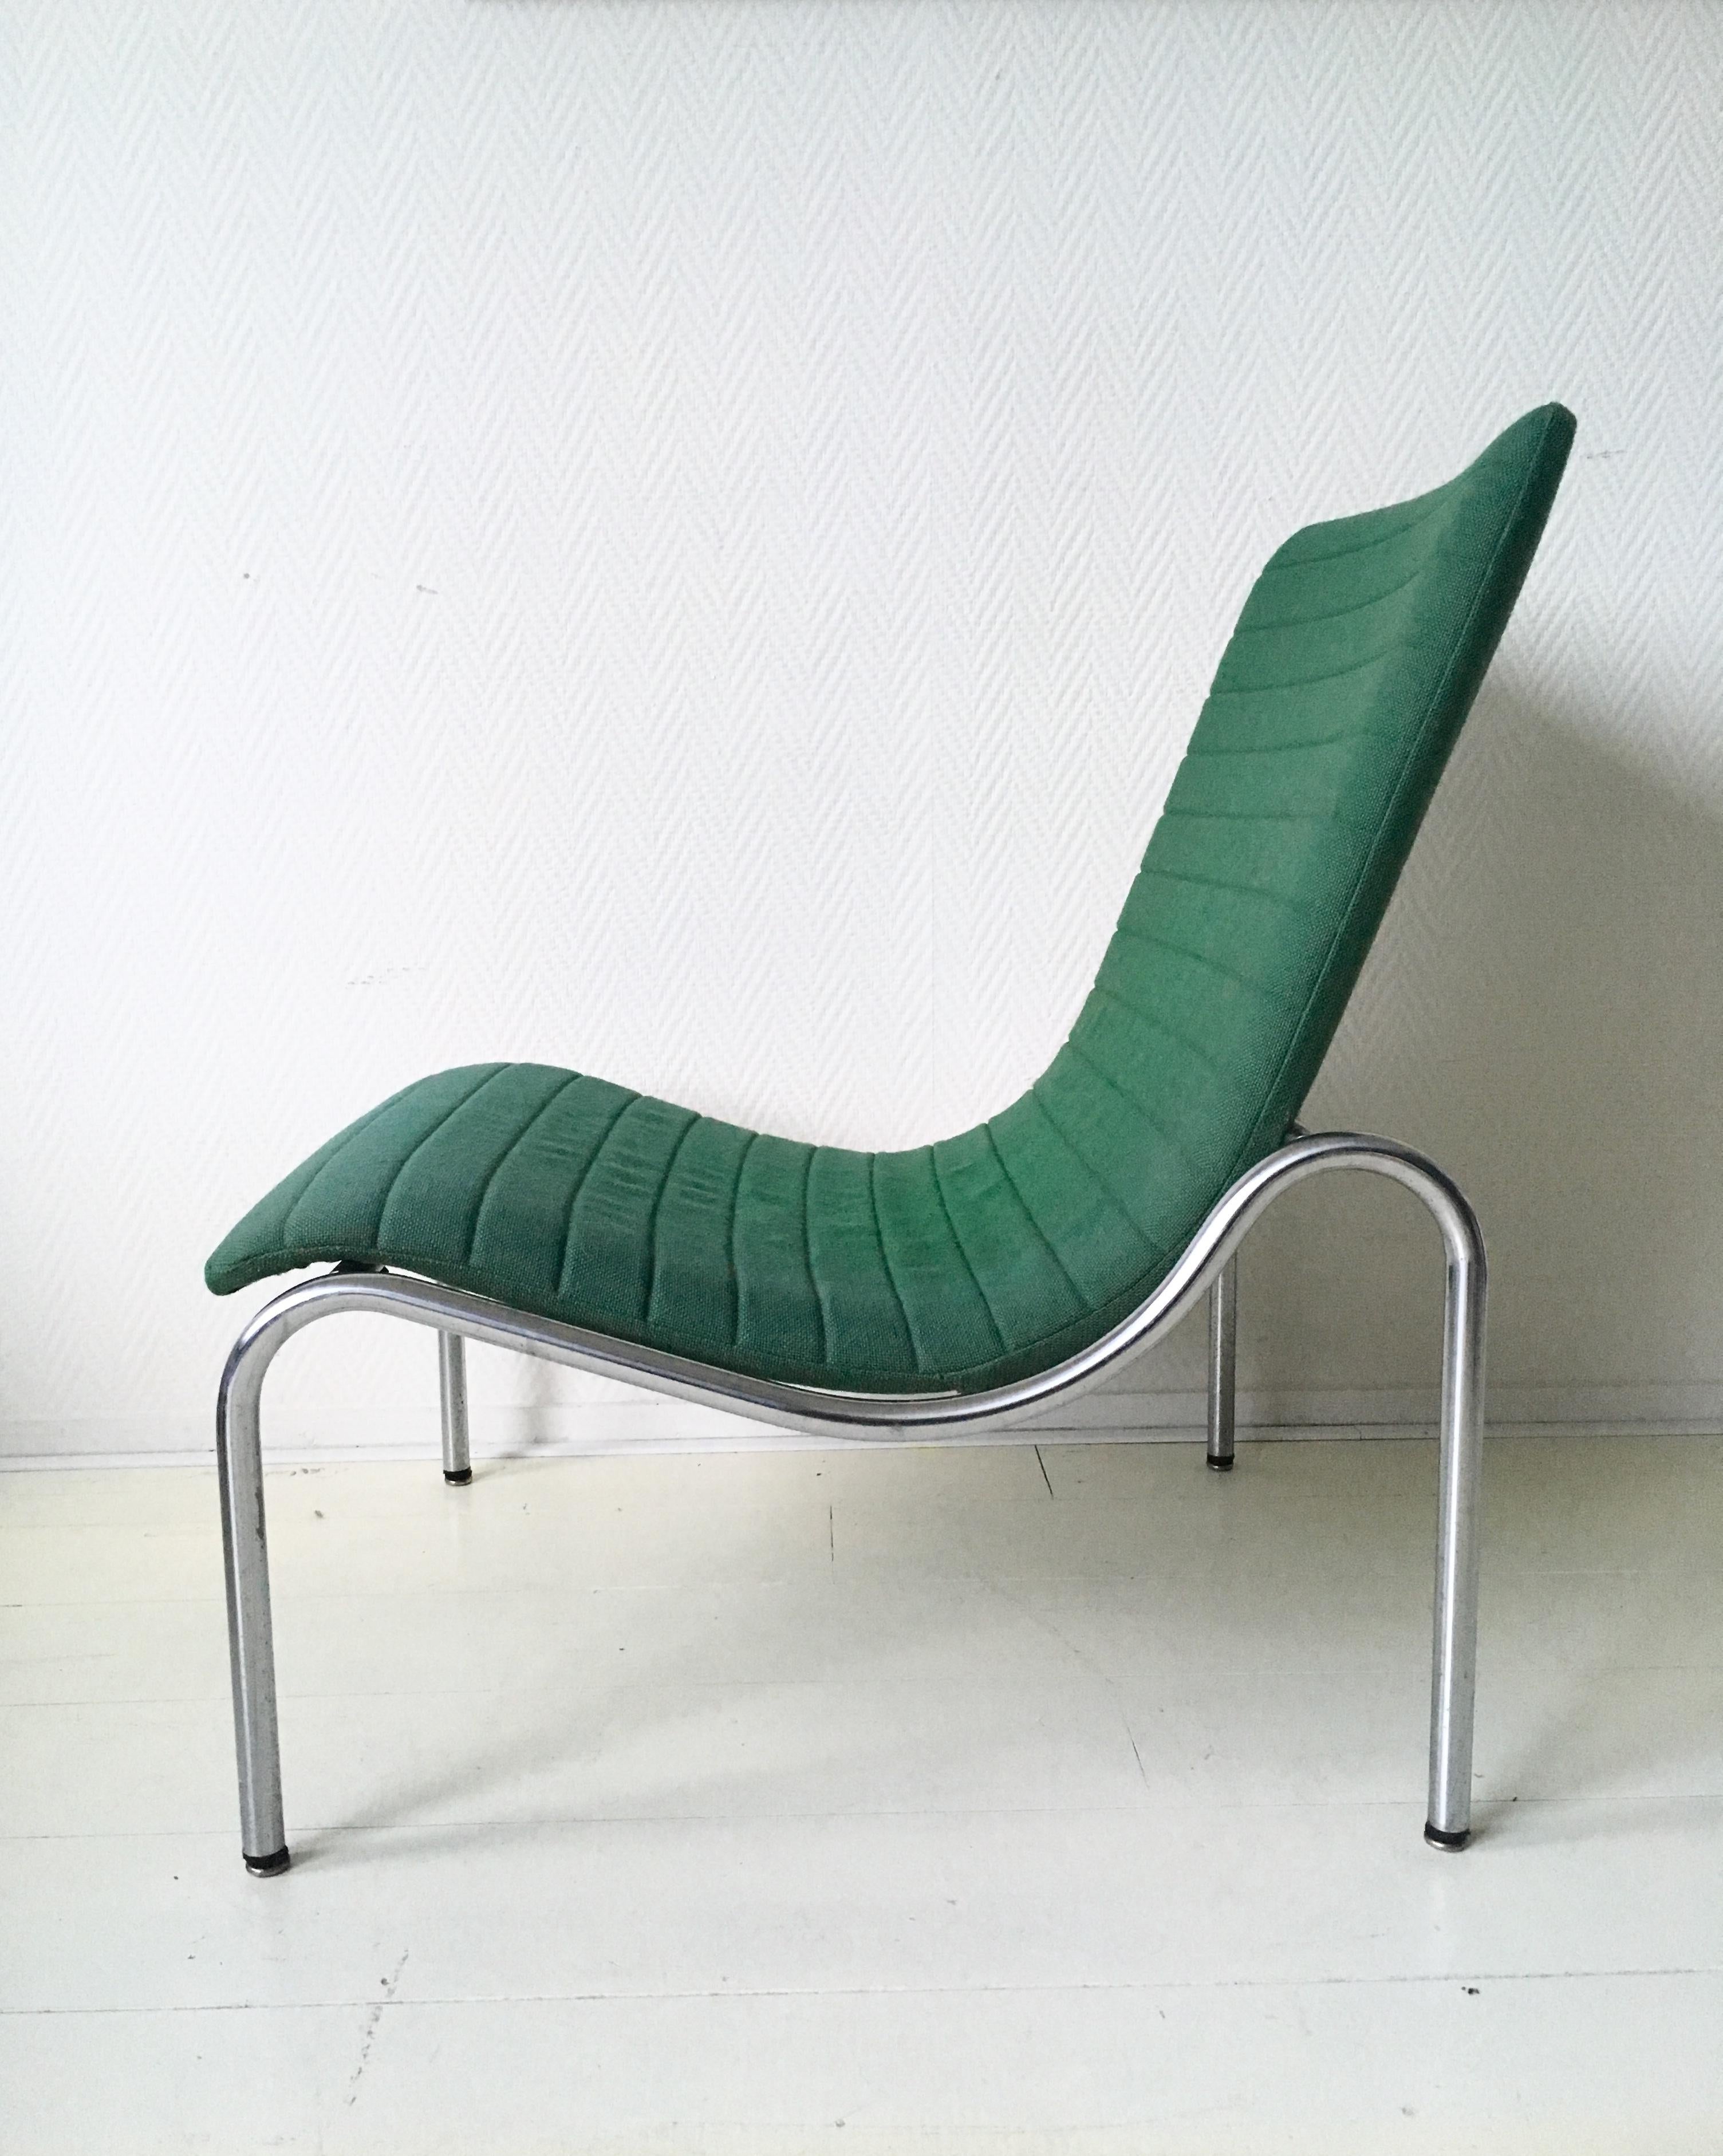 This lounge chair was designed by Kho Liang Ie for Stabin Holland in 1968. It features a tubular base with green upholstery. The piece remains in good vintage condition. NOW TEMPORARY DISCOUNT PROMO CODE AVAILABLE, SEND MESSAGE FOR MORE INFORMATION!